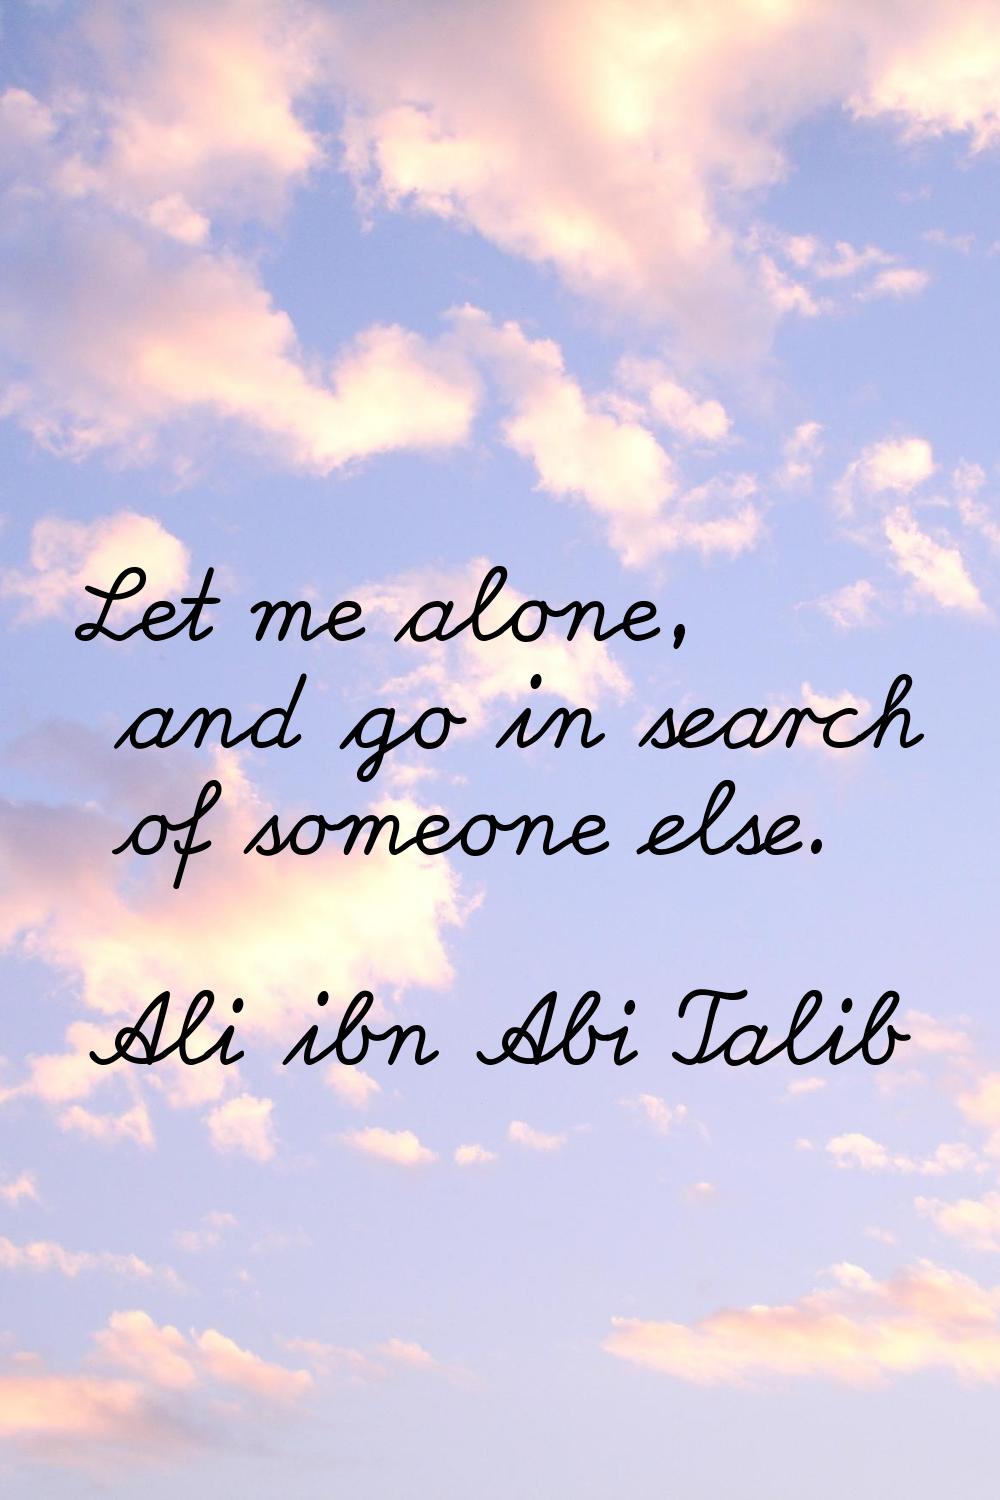 Let me alone, and go in search of someone else.